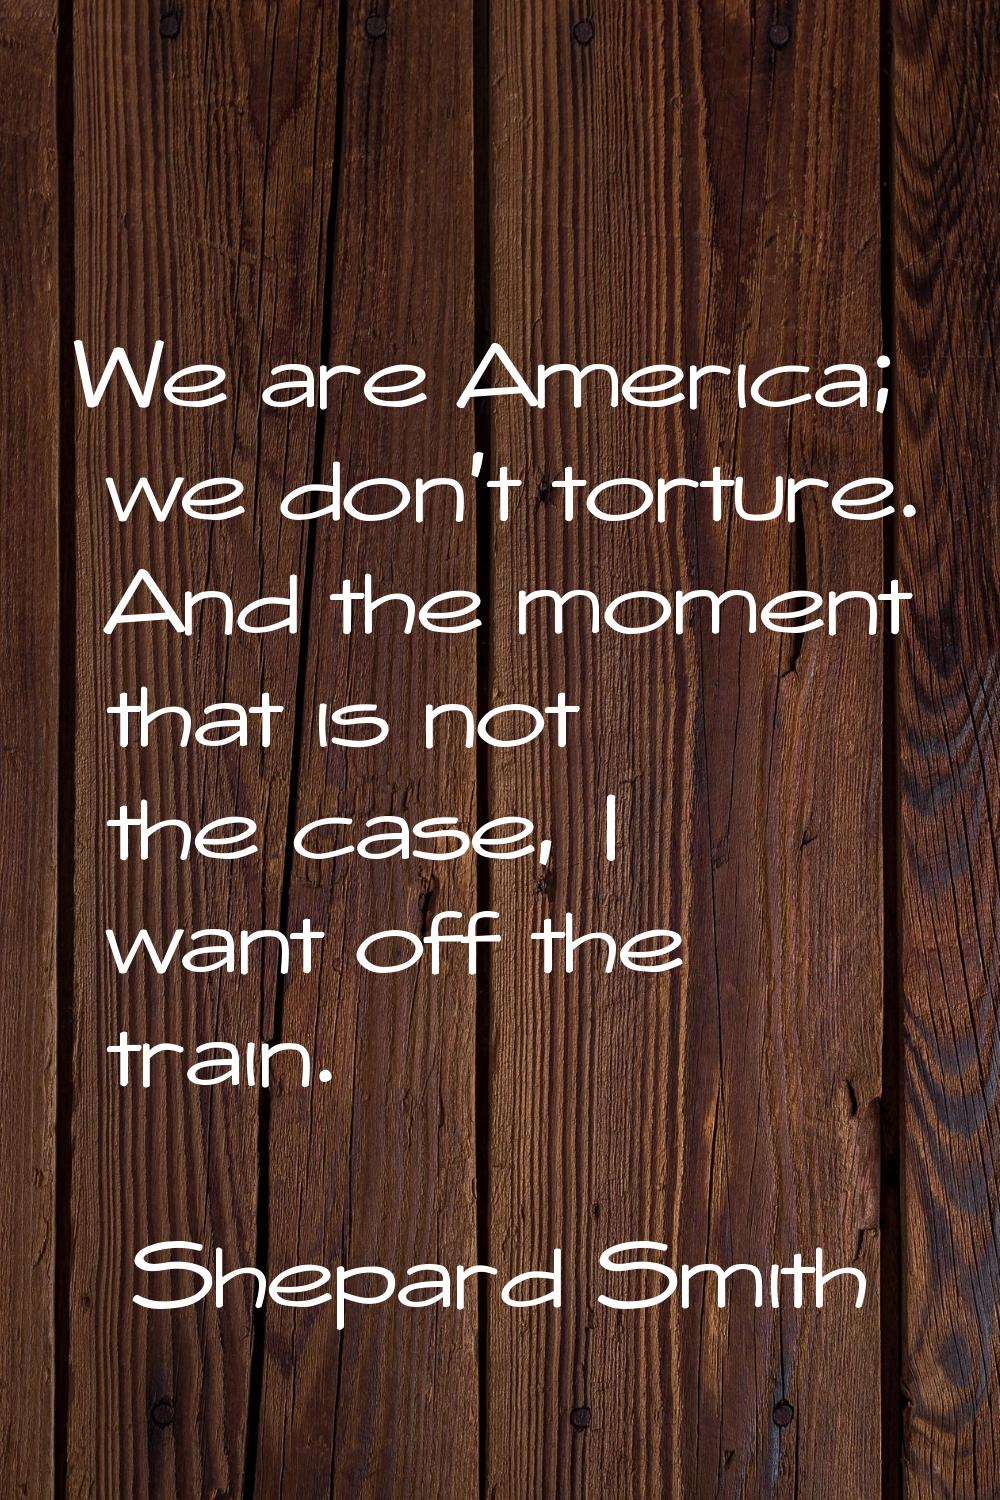 We are America; we don't torture. And the moment that is not the case, I want off the train.